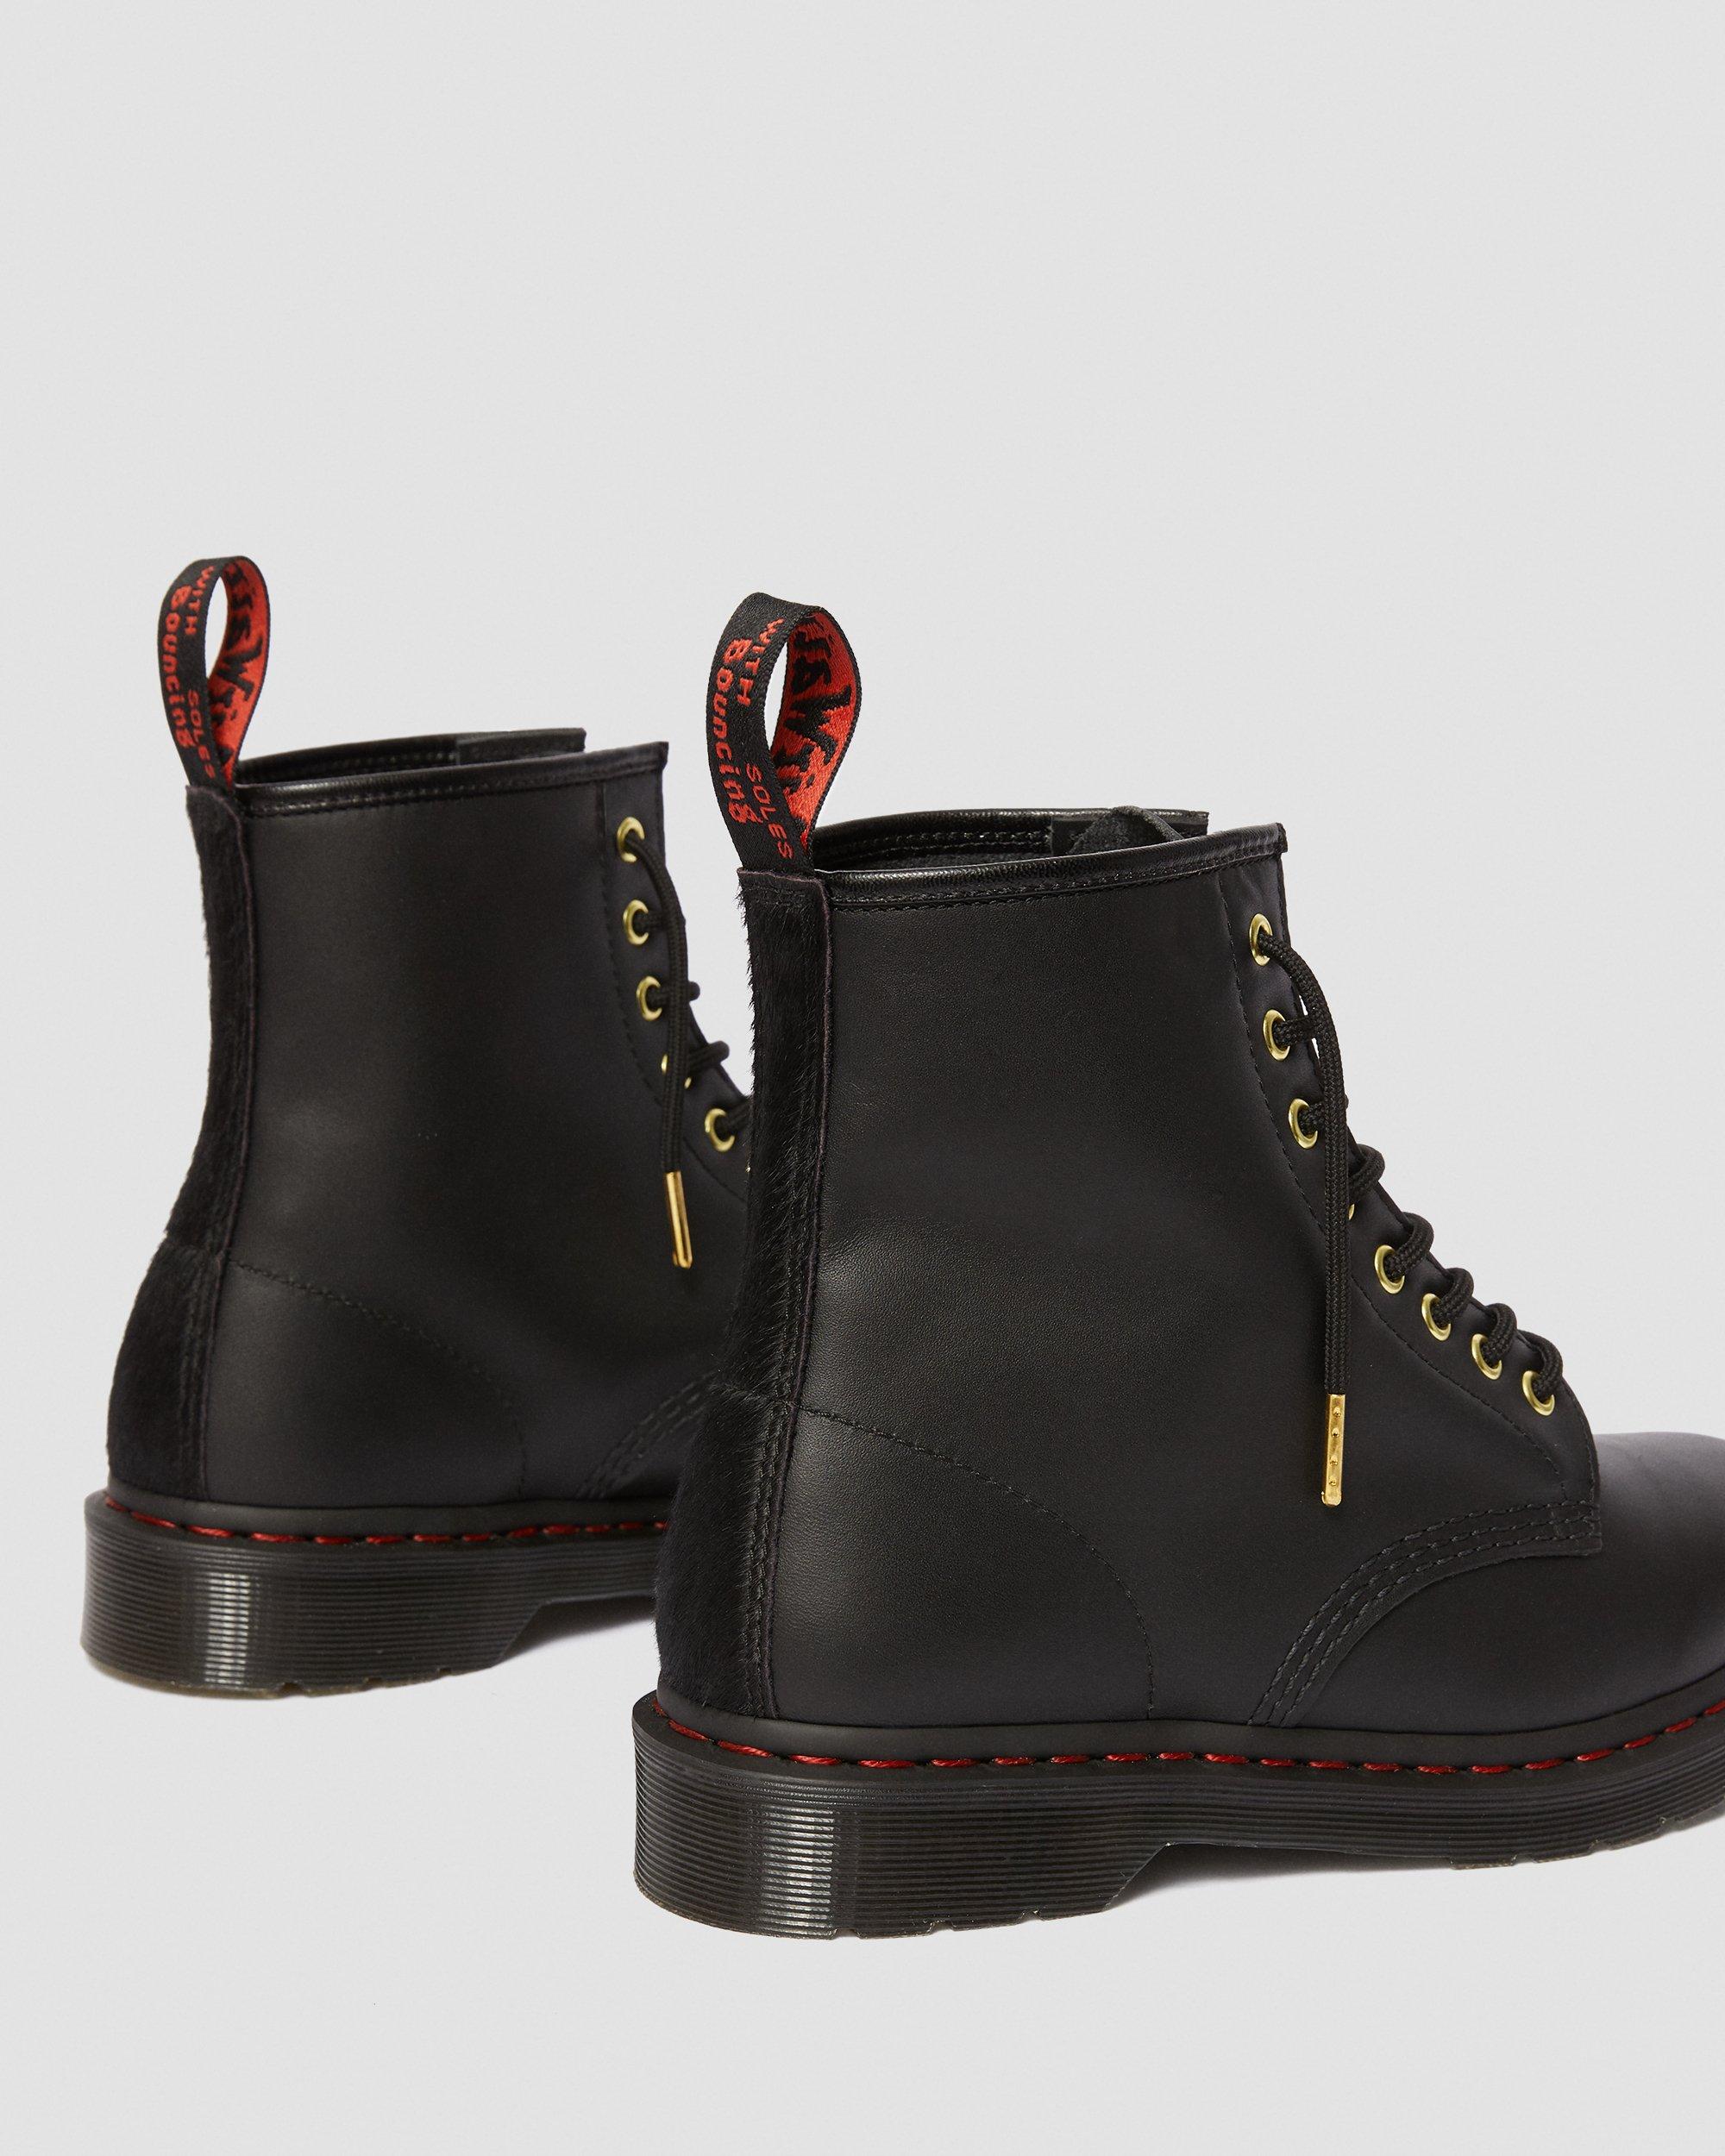 1460 CHINESE NEW YEAR STIEFEL AUS LEDER Dr. Martens